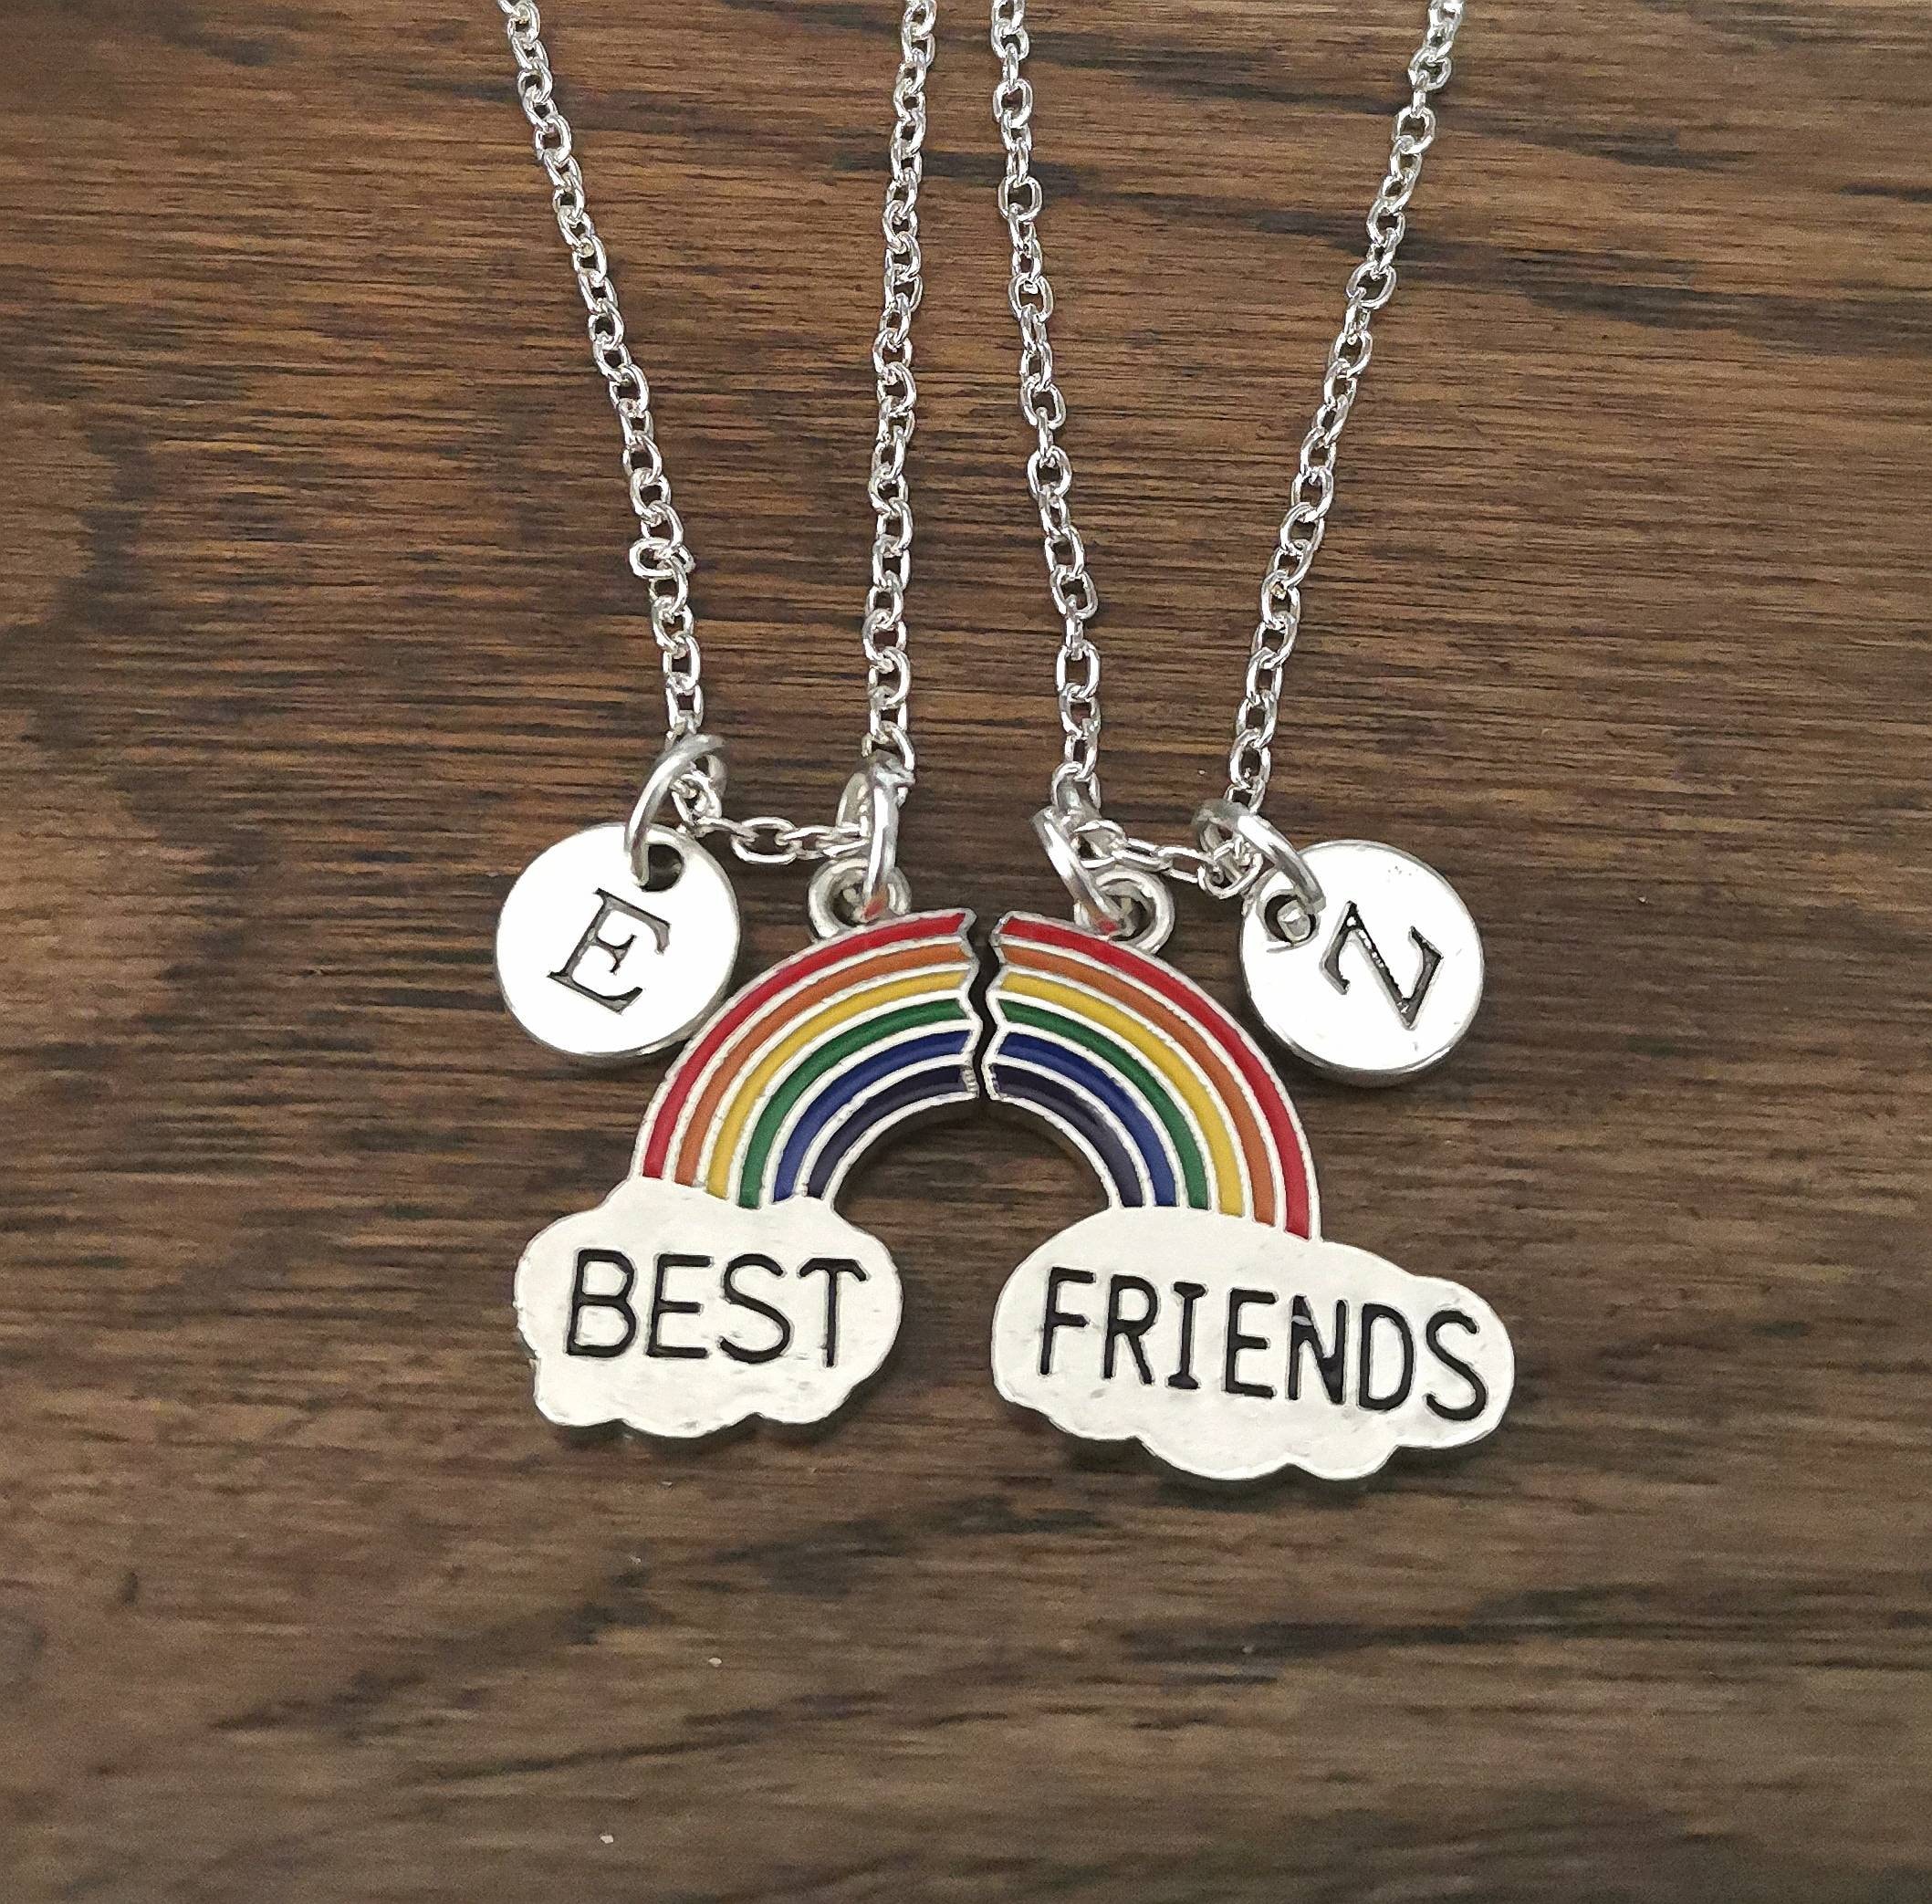 as Show, One Size 2 Pcs Friendship Pendant Necklace for Women 2-Split Best Friend Forever Necklaces Funny Burger and Fries Statement Necklaces for Teen Girls Jewelry Birthday Gifts 